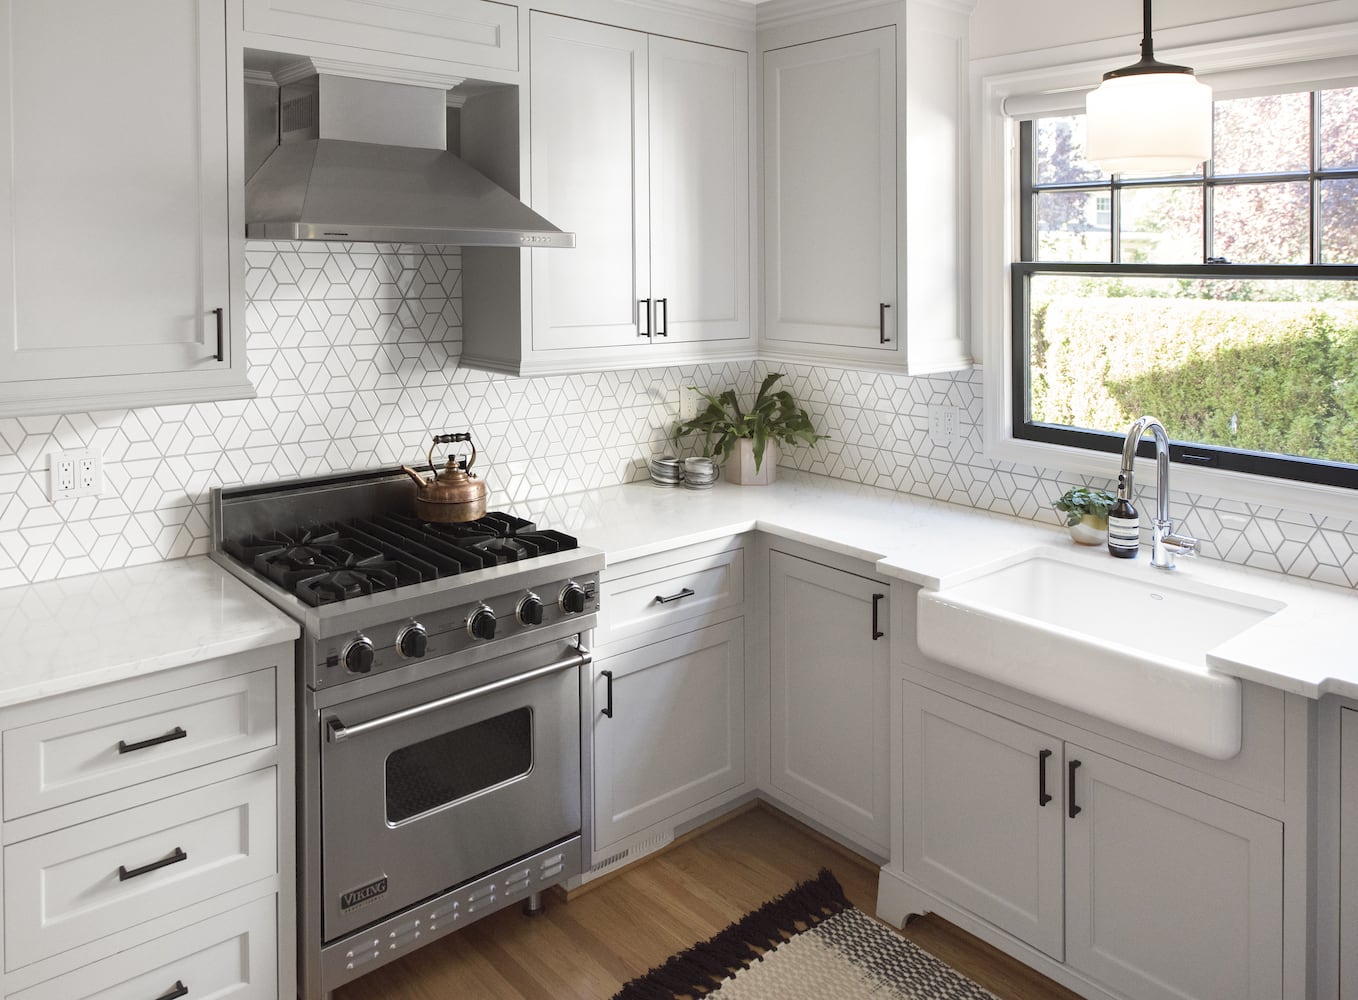 Bright Portland kitchen remodel with white apron sink, white counters and cabinets